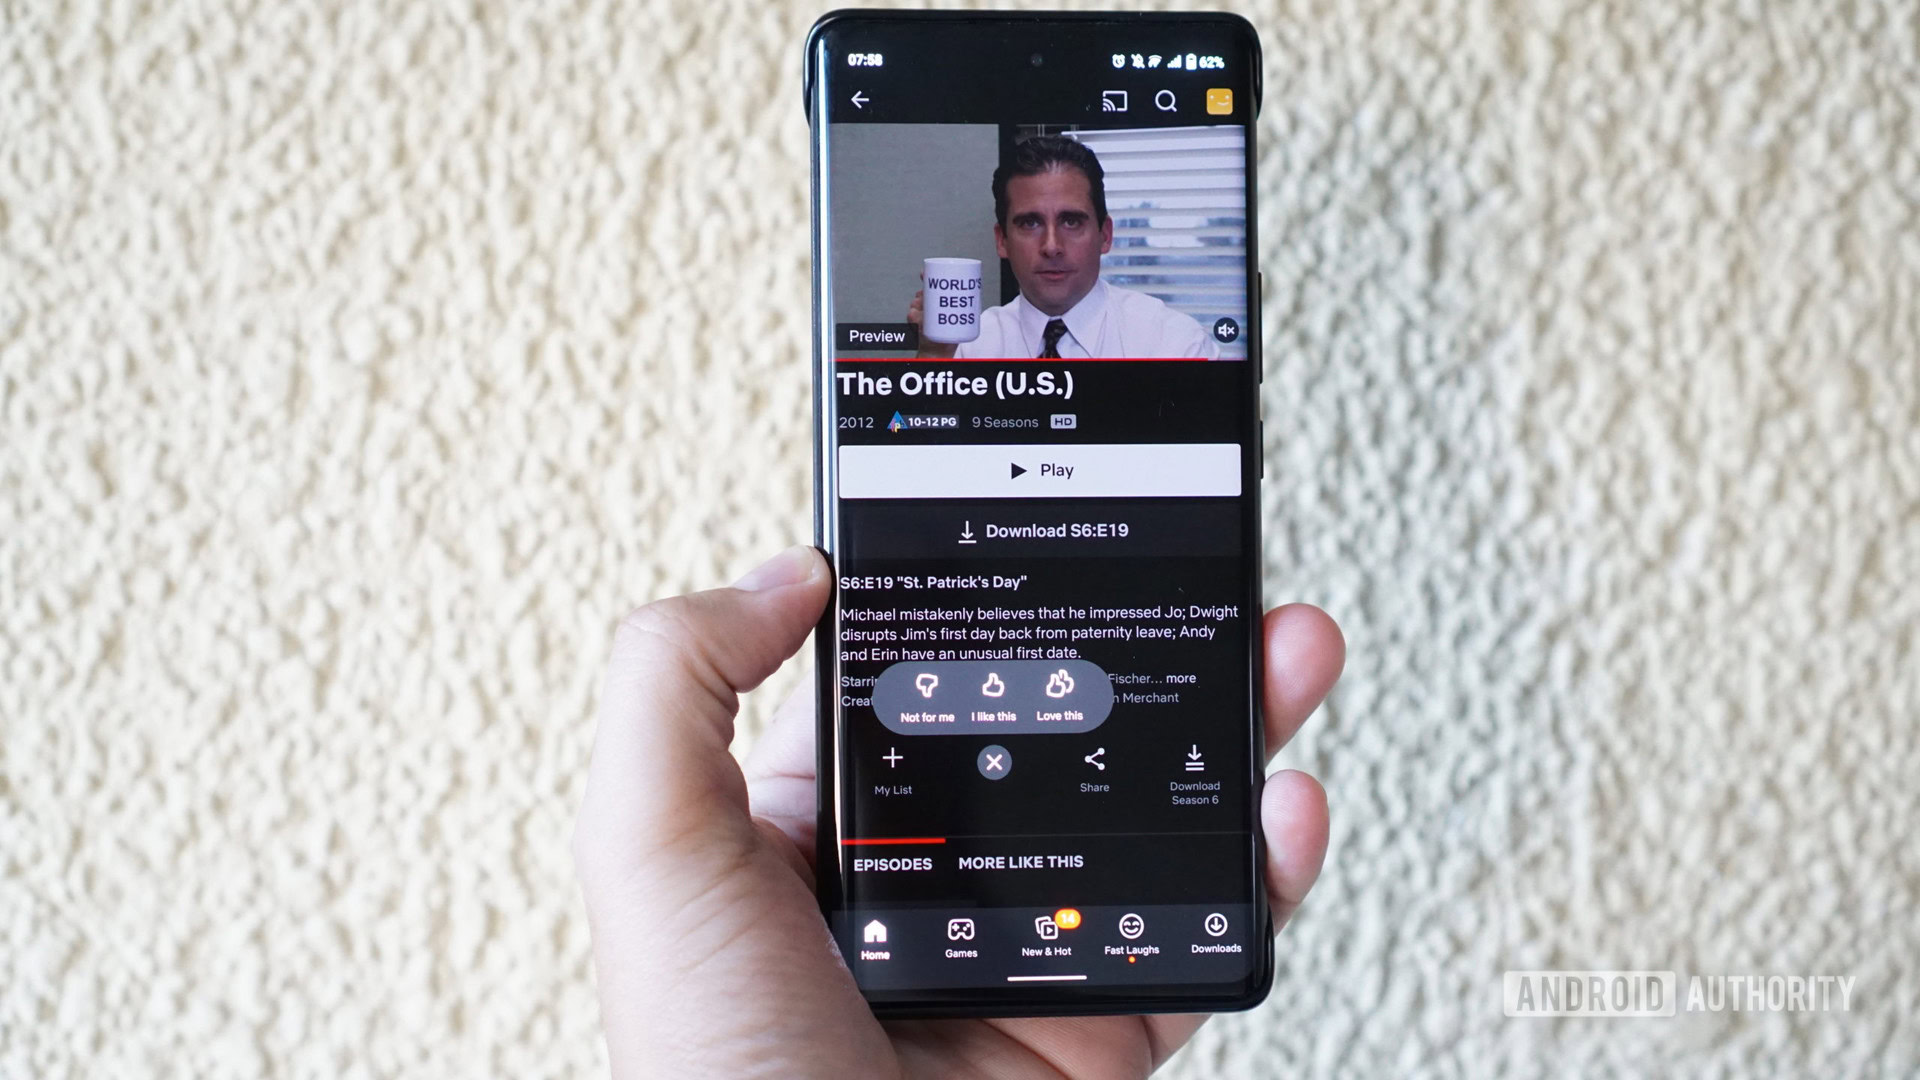 Netflix two thumbs up in app